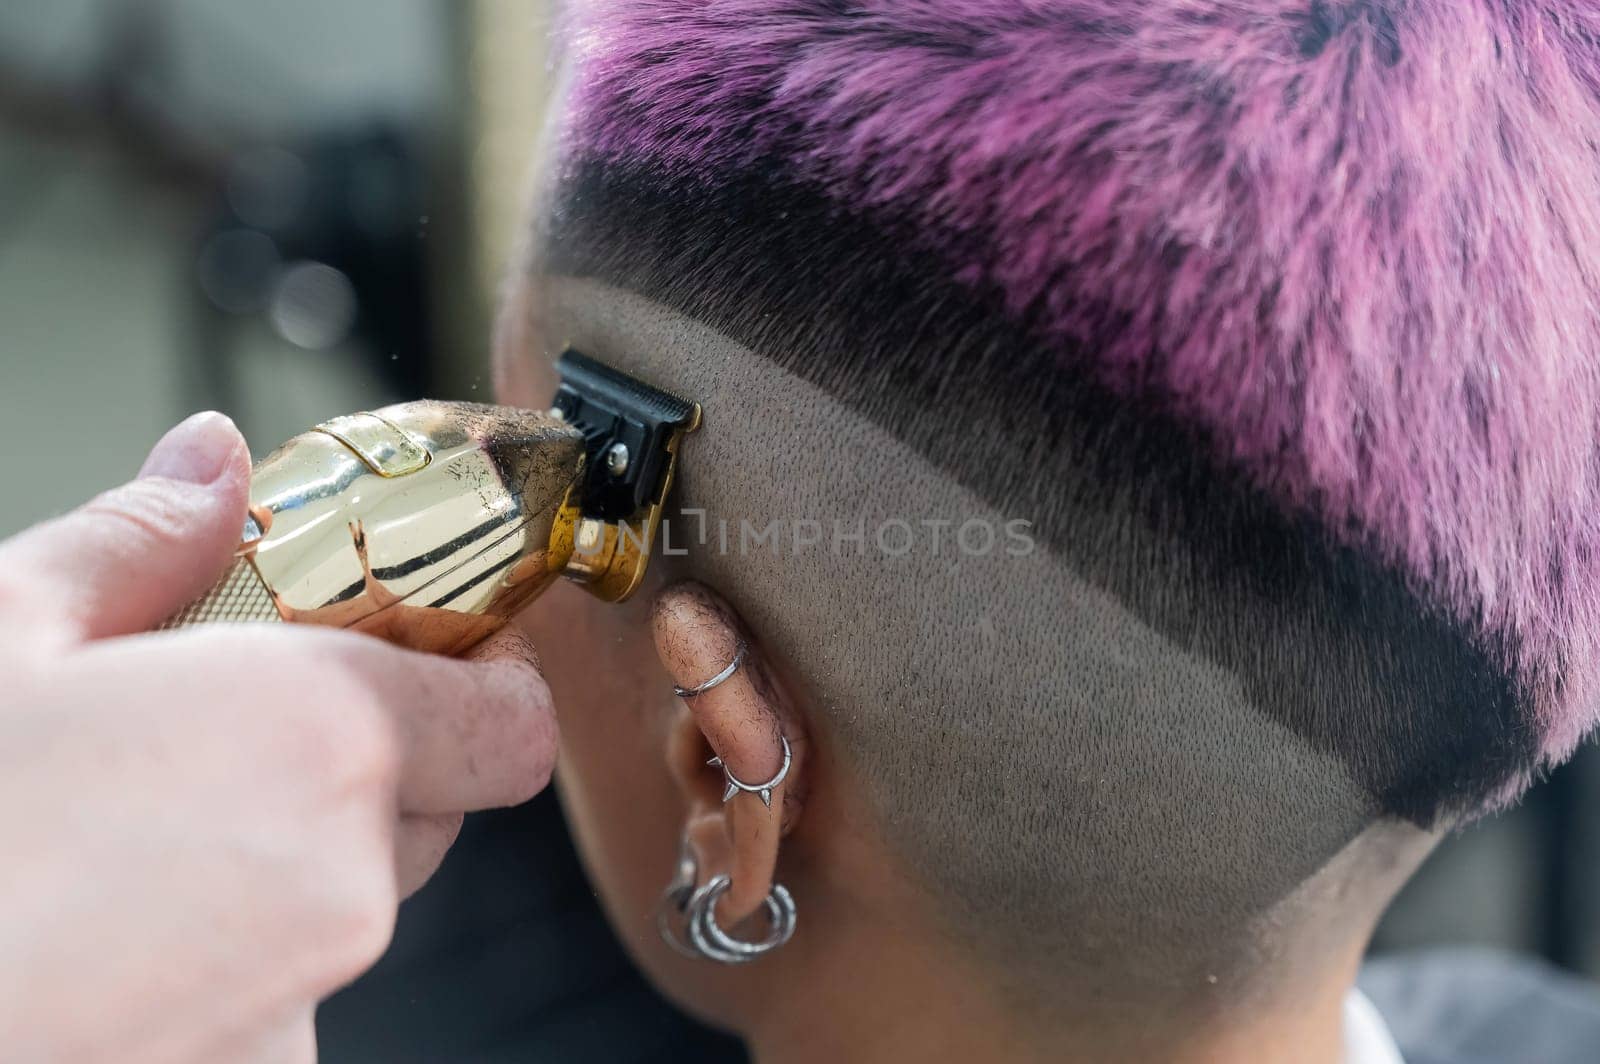 The hairdresser shaves the temple of a female client. Rear view of a woman with short pink hair in a barbershop